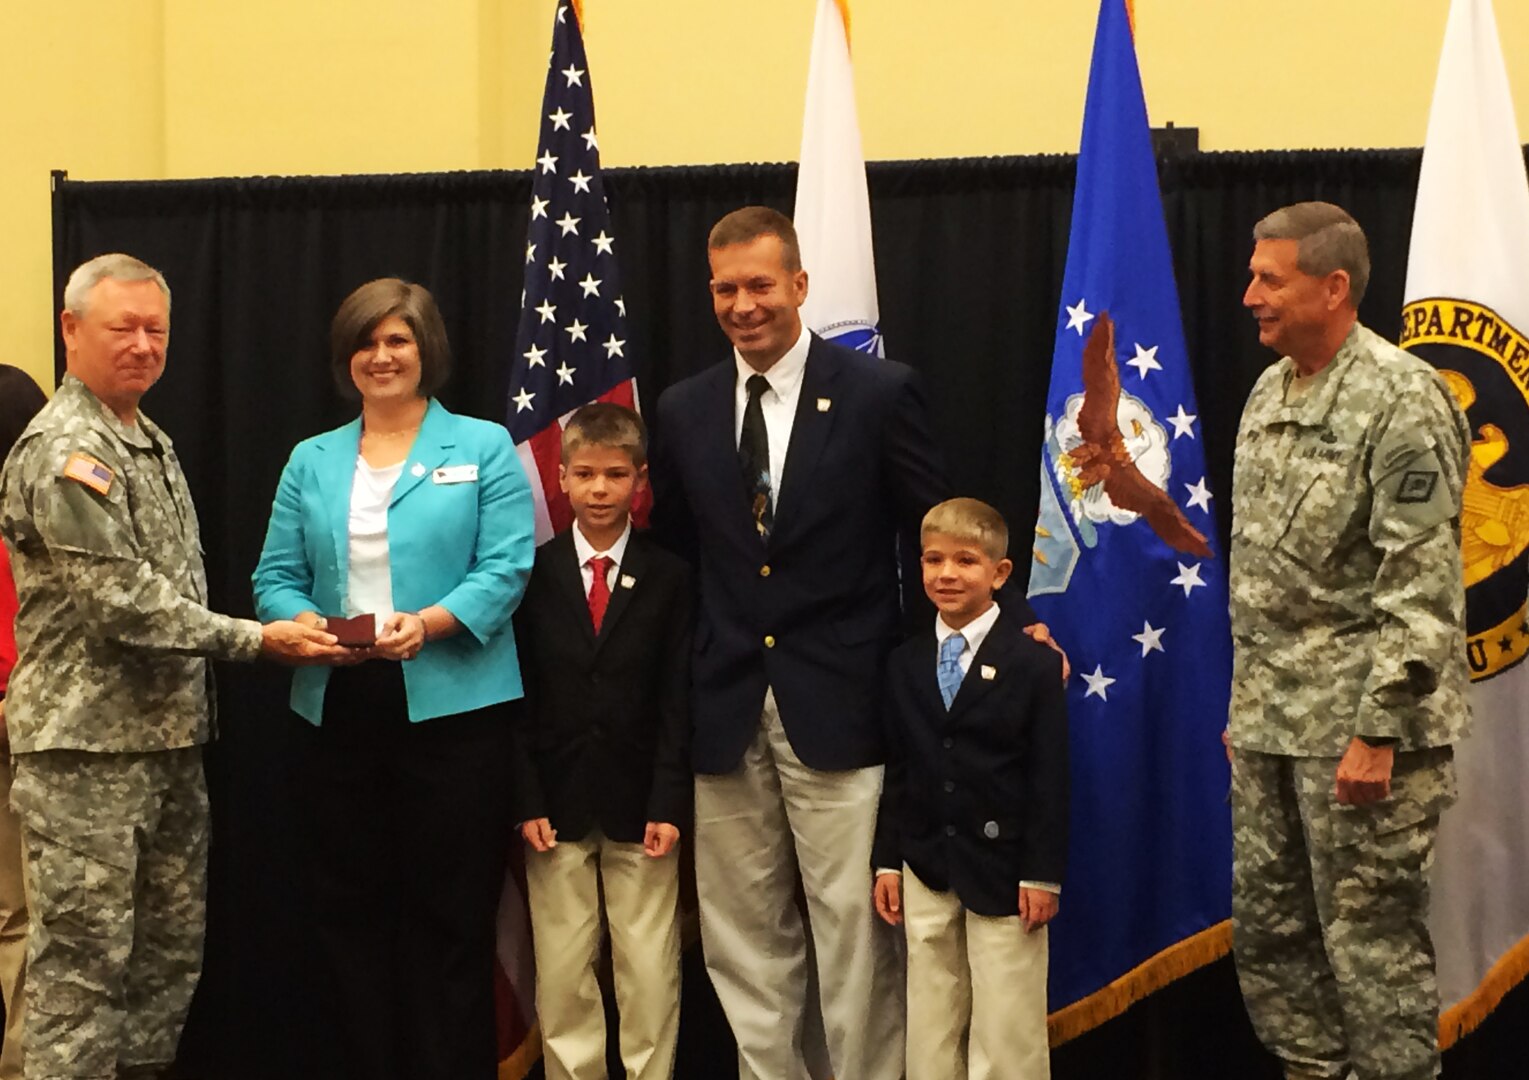 The 188th Wing’s Barr family - Senior Master Sgt. Scott Barr, his wife Cindy and the couple’s children - were awarded National Military Family Association 2014 Family of the Year Award for the Air National Guard. Gen. Frank Grass, chief of the National Guard, left, and Maj. Gen. William Wofford, Arkansas National Guard adjutant general, right, presented the accolade to the Barrs at the national volunteer conference in Norman, Oklahoma, Aug. 13. 